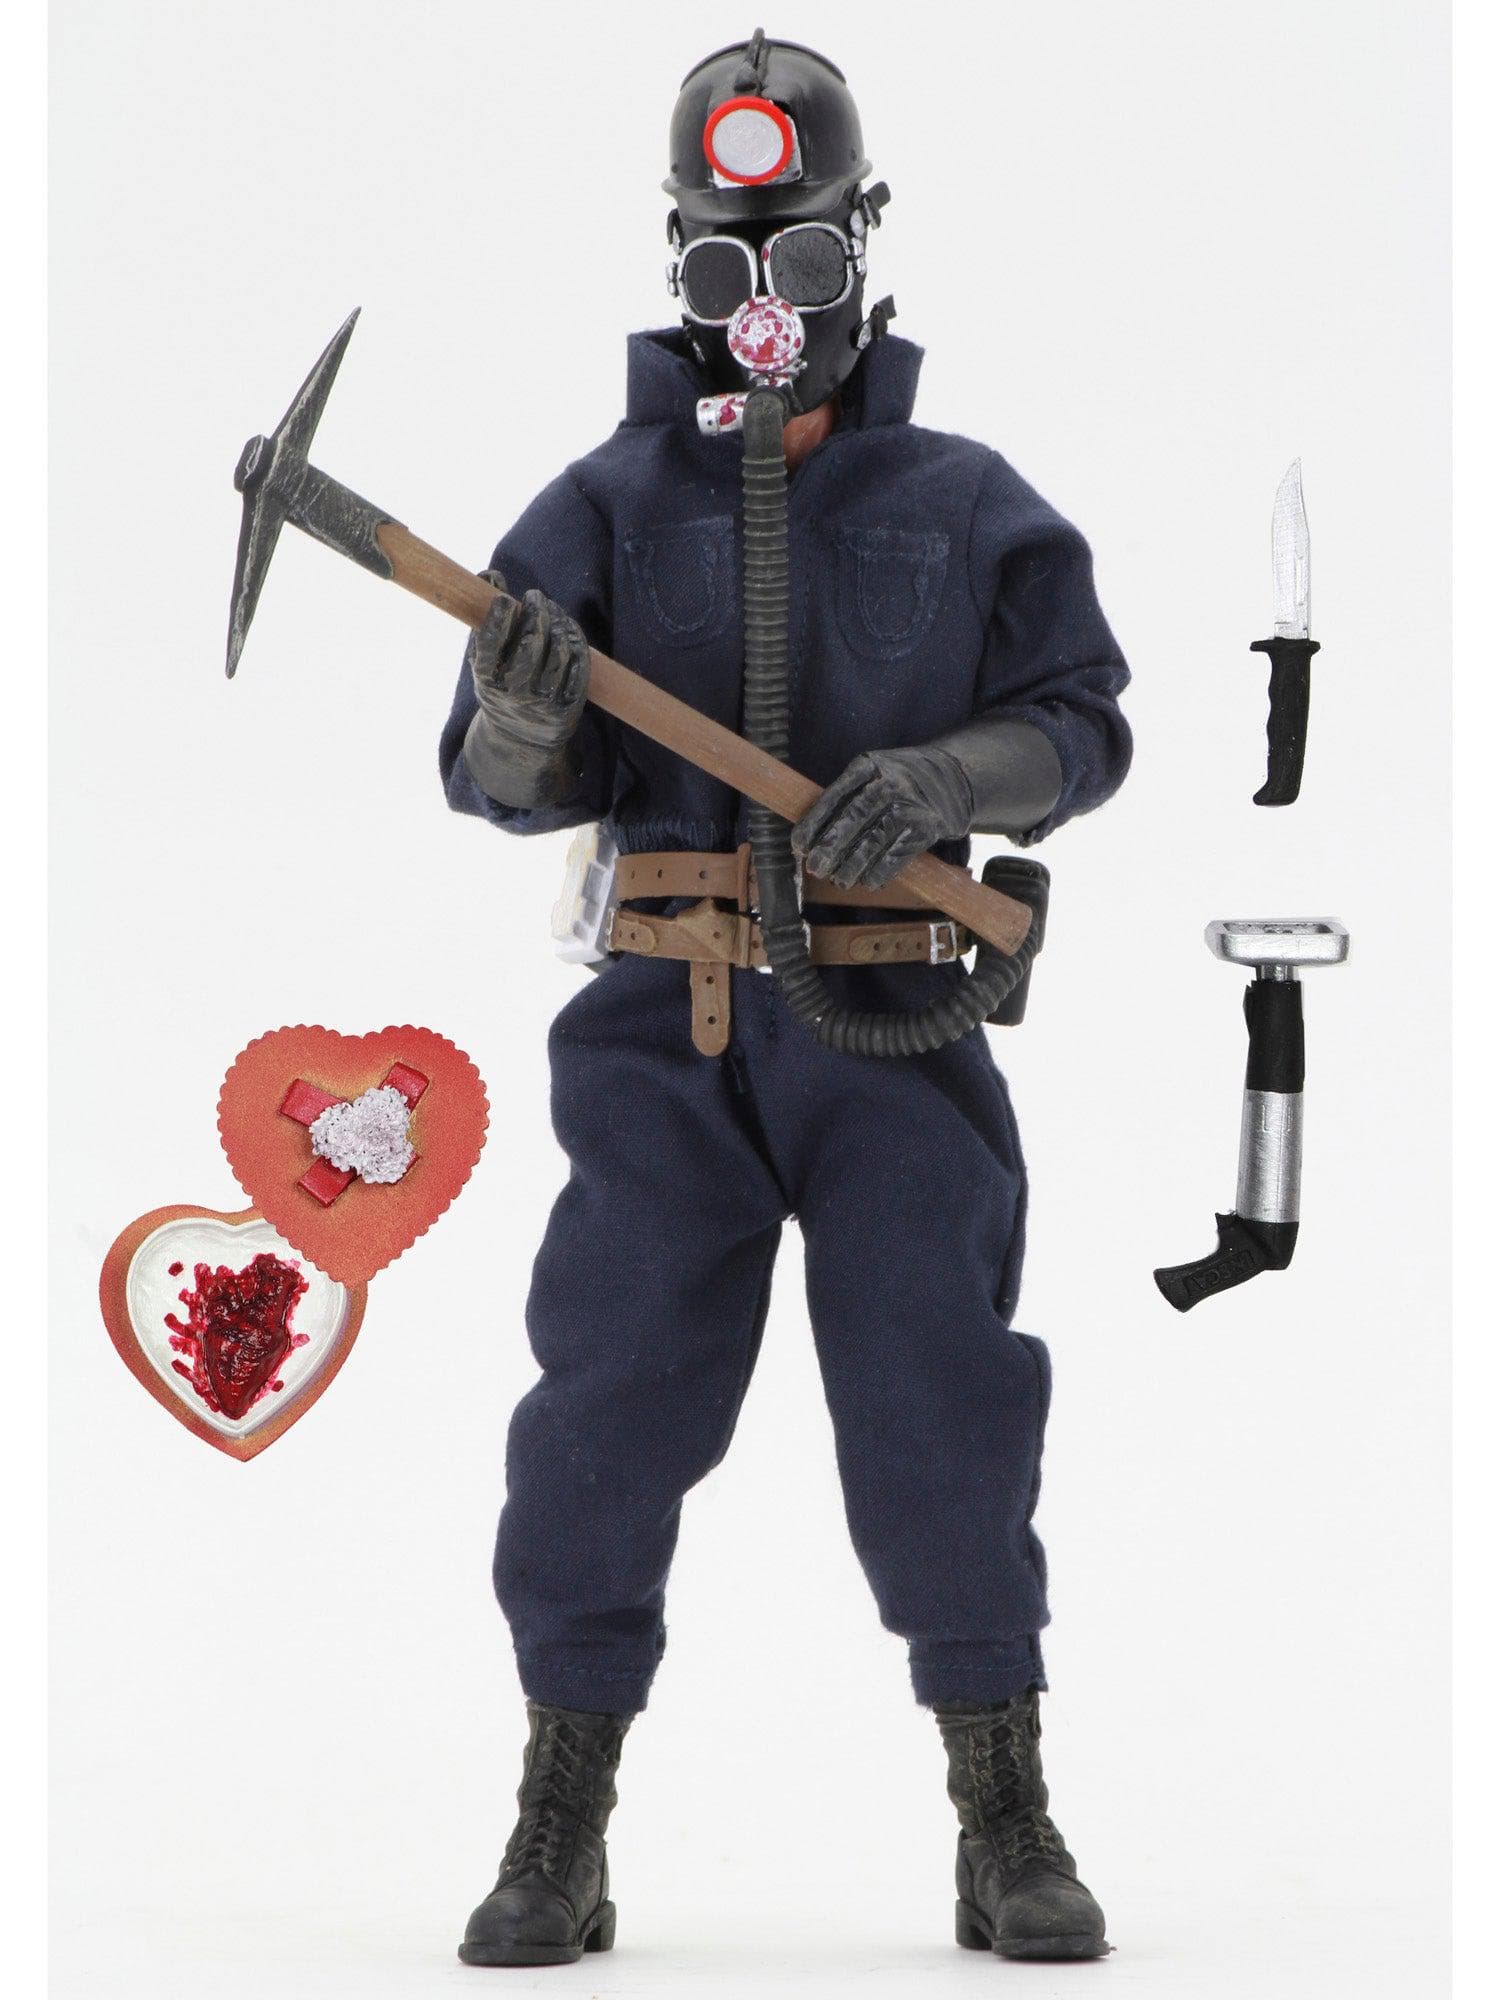 NECA - My Bloody Valentine - 8" Clothed Action Figure - The Miner - costumes.com